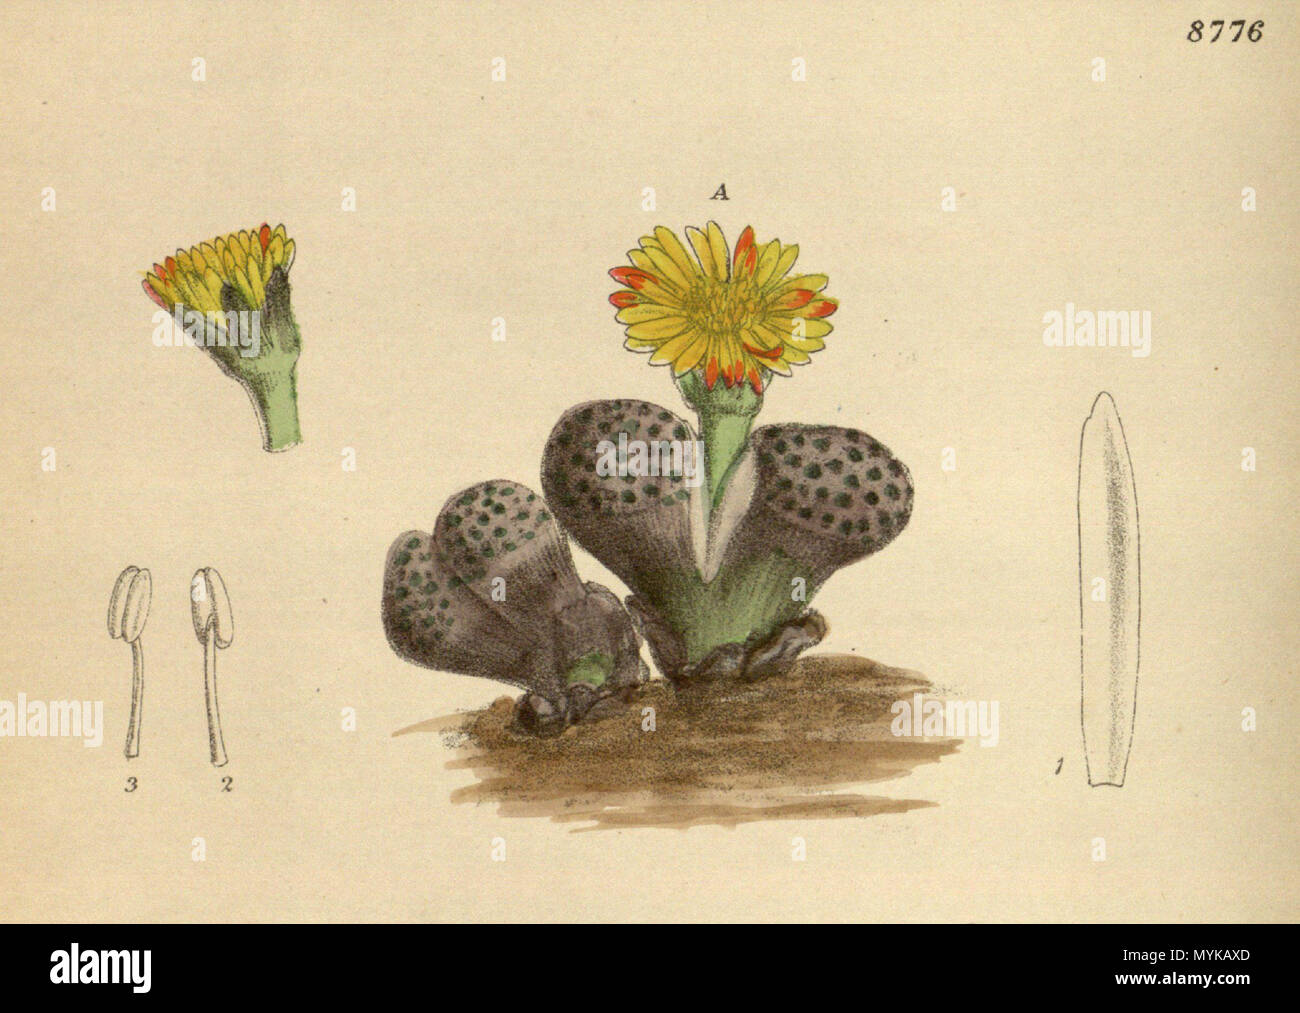 . Mesembryanthemum fulviceps (= Lithops fulviceps), Aizoaceae . 1918. M.S. del., J.N.Fitch lith. 360 Mesembryanthemum fulviceps 144-8776A Stock Photo